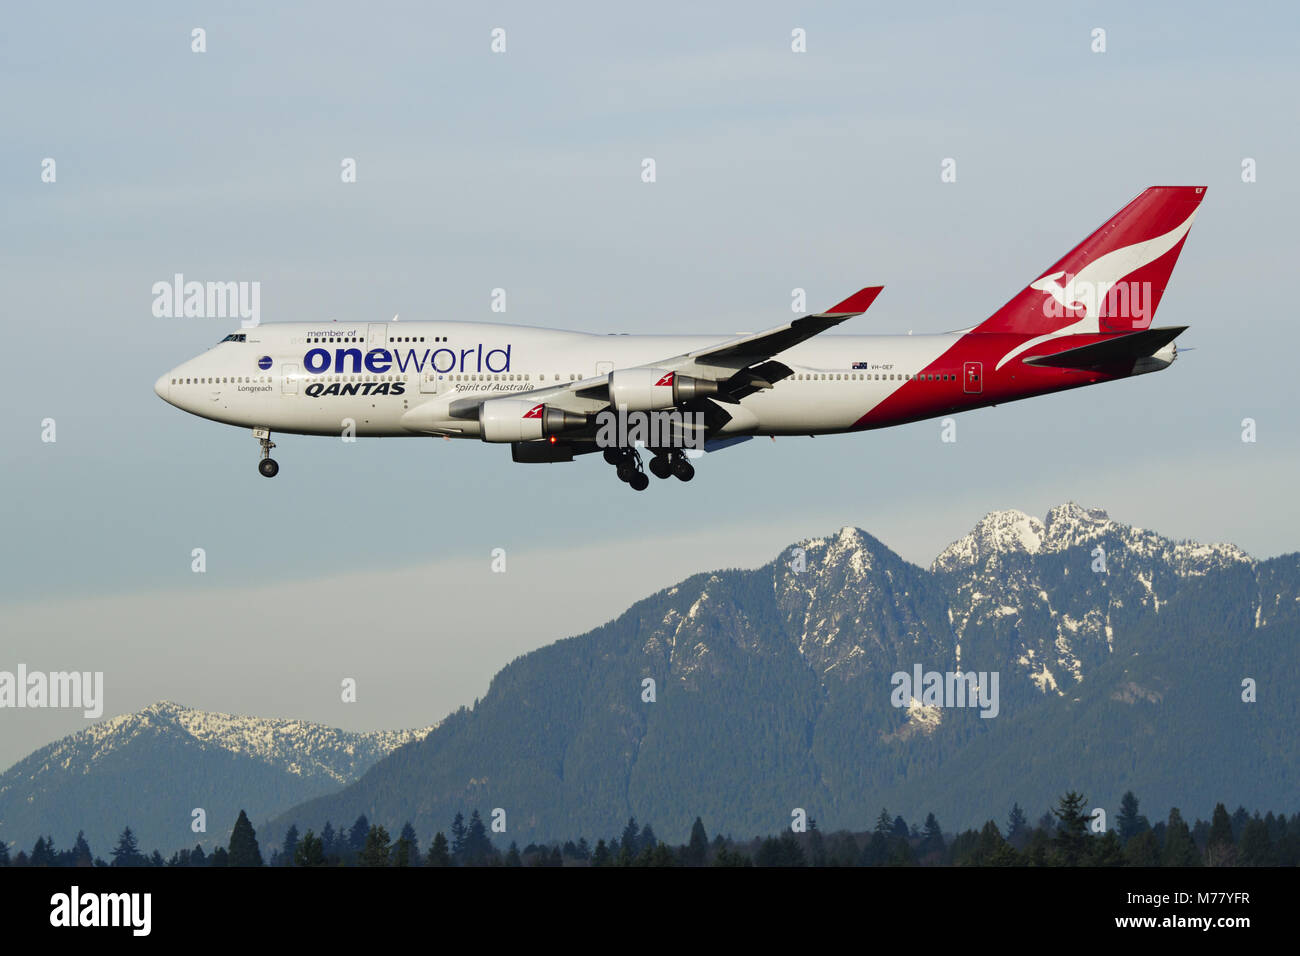 Richmond, British Columbia, Canada. 15th Jan, 2018. A Qantas Airways Boeing 747-400ER (VH-OEF) wide-body jumbo jet airliner, painted in special ''oneworld'' livery, on final approach for landing at Vancouver International Airport. Credit: Bayne Stanley/ZUMA Wire/Alamy Live News Stock Photo